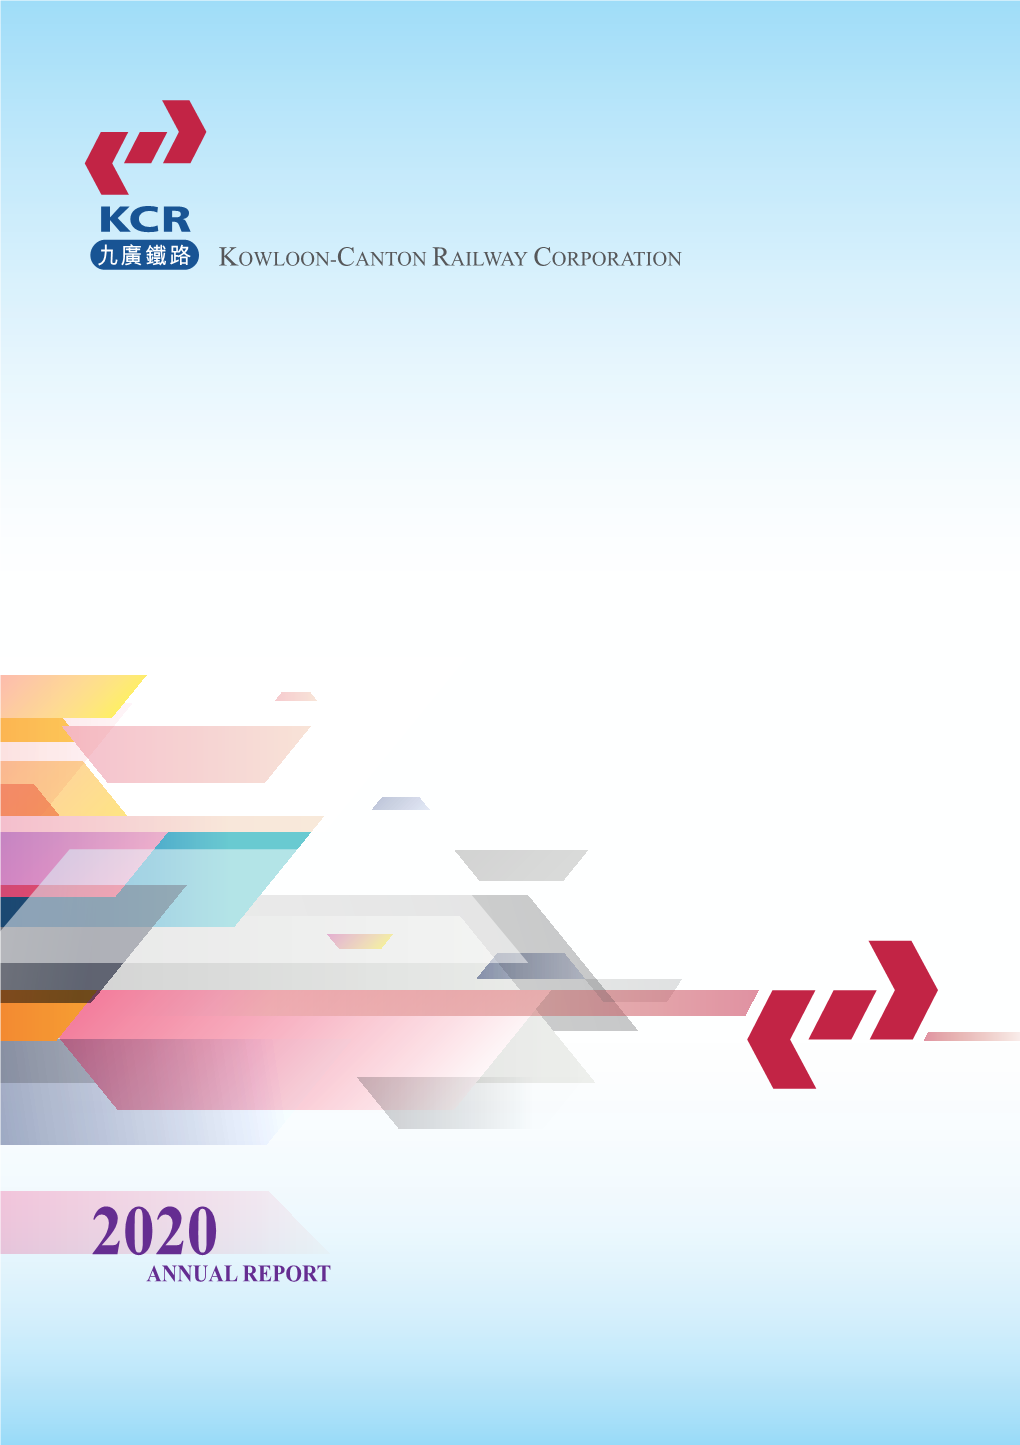 KCRC's Annual Report for 2020